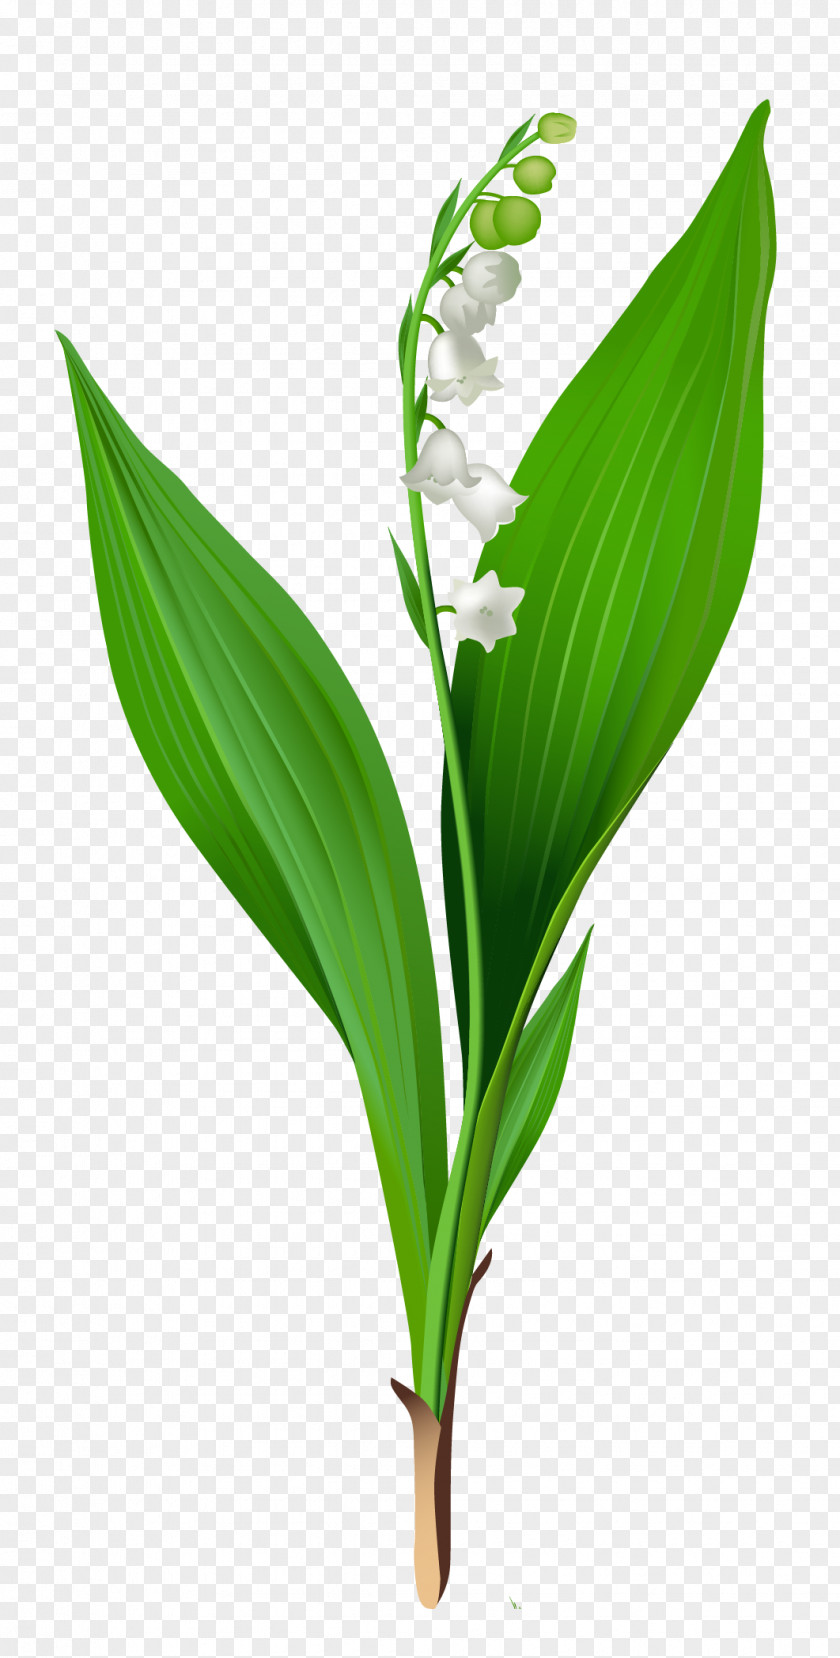 Spring Lily Of The Valley Clipart Arum-lily Flower Clip Art PNG